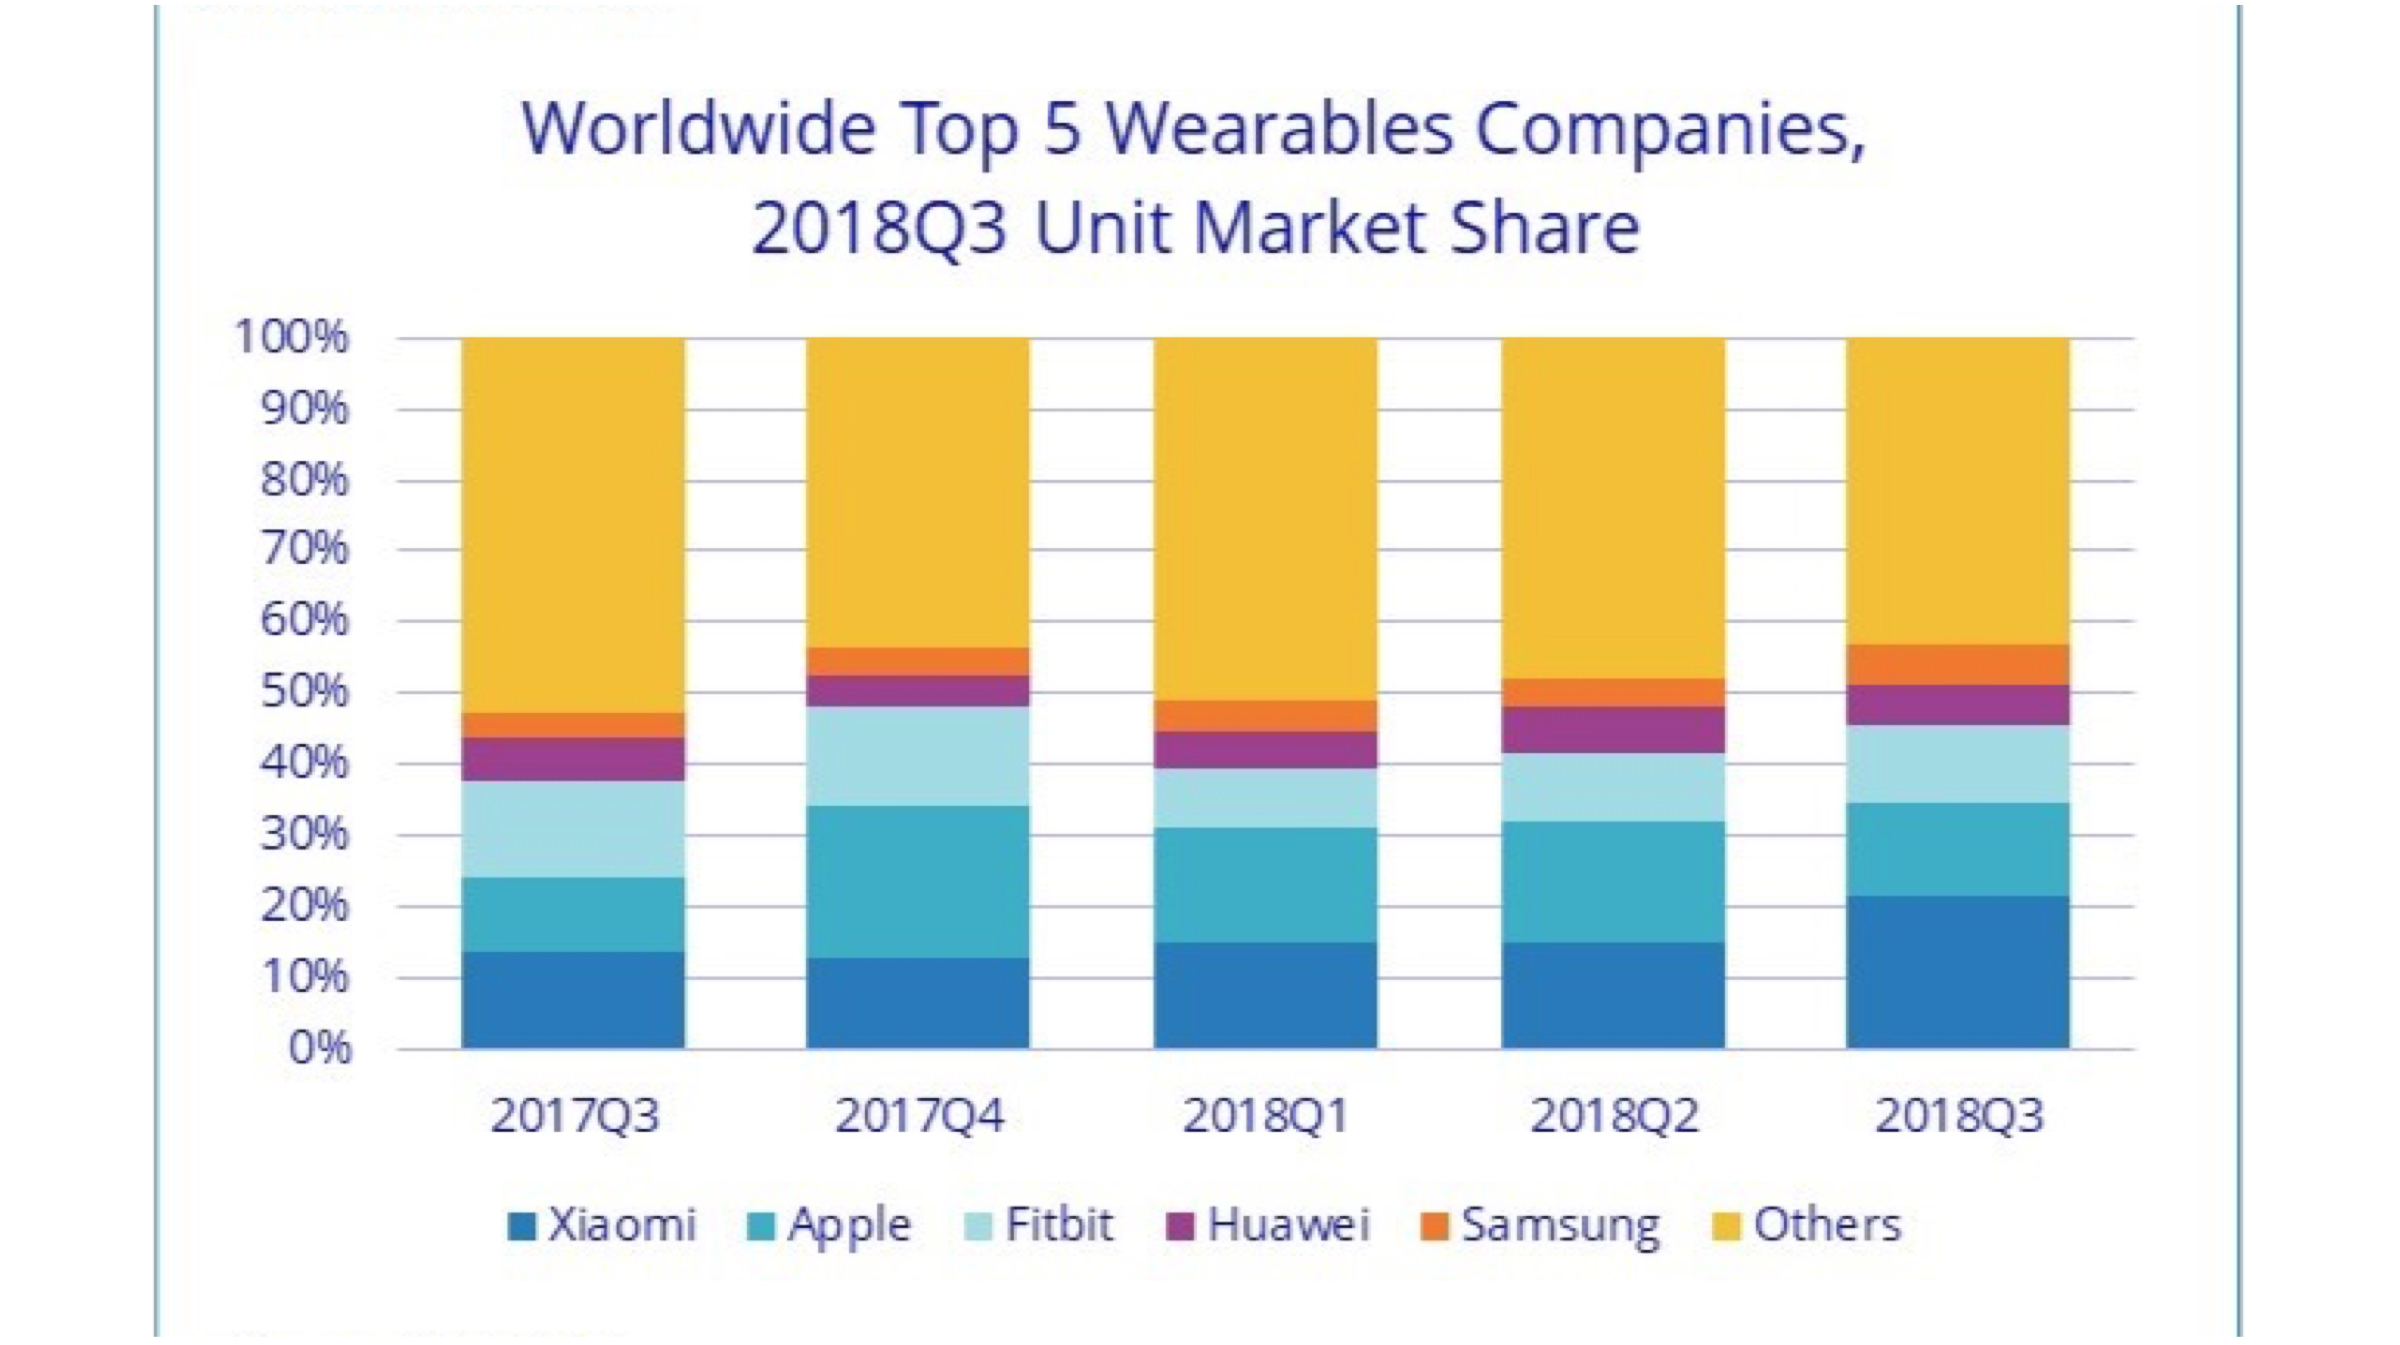 IDC Wearable Report